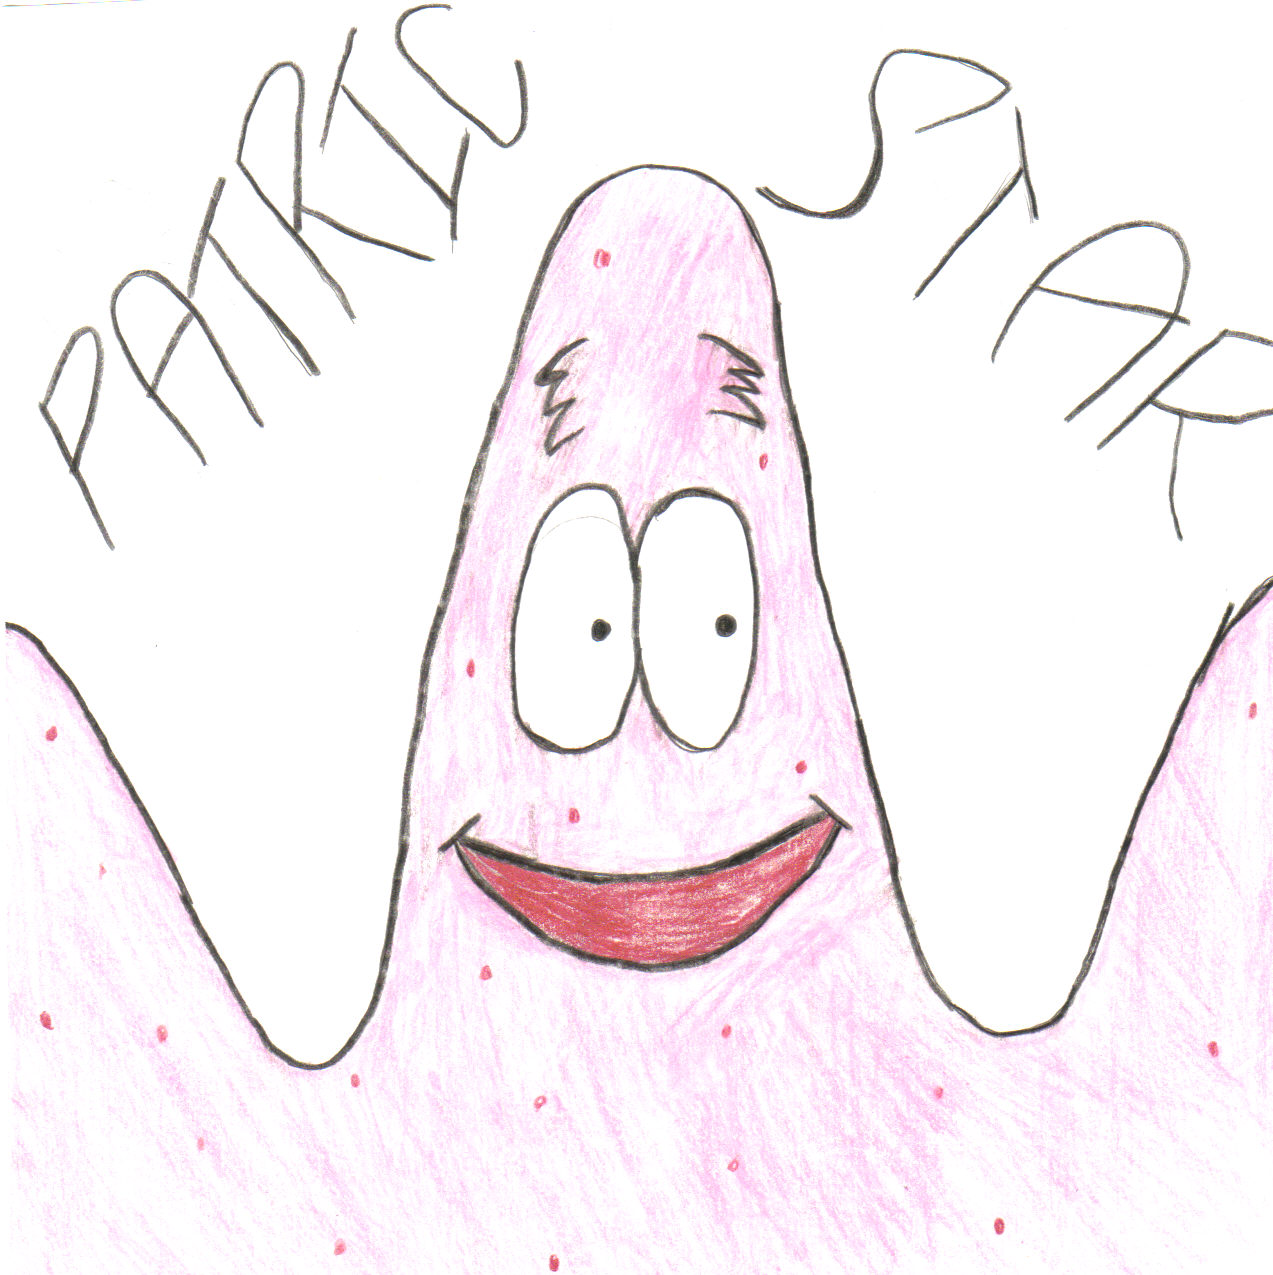 Patric Star by frog_lover300